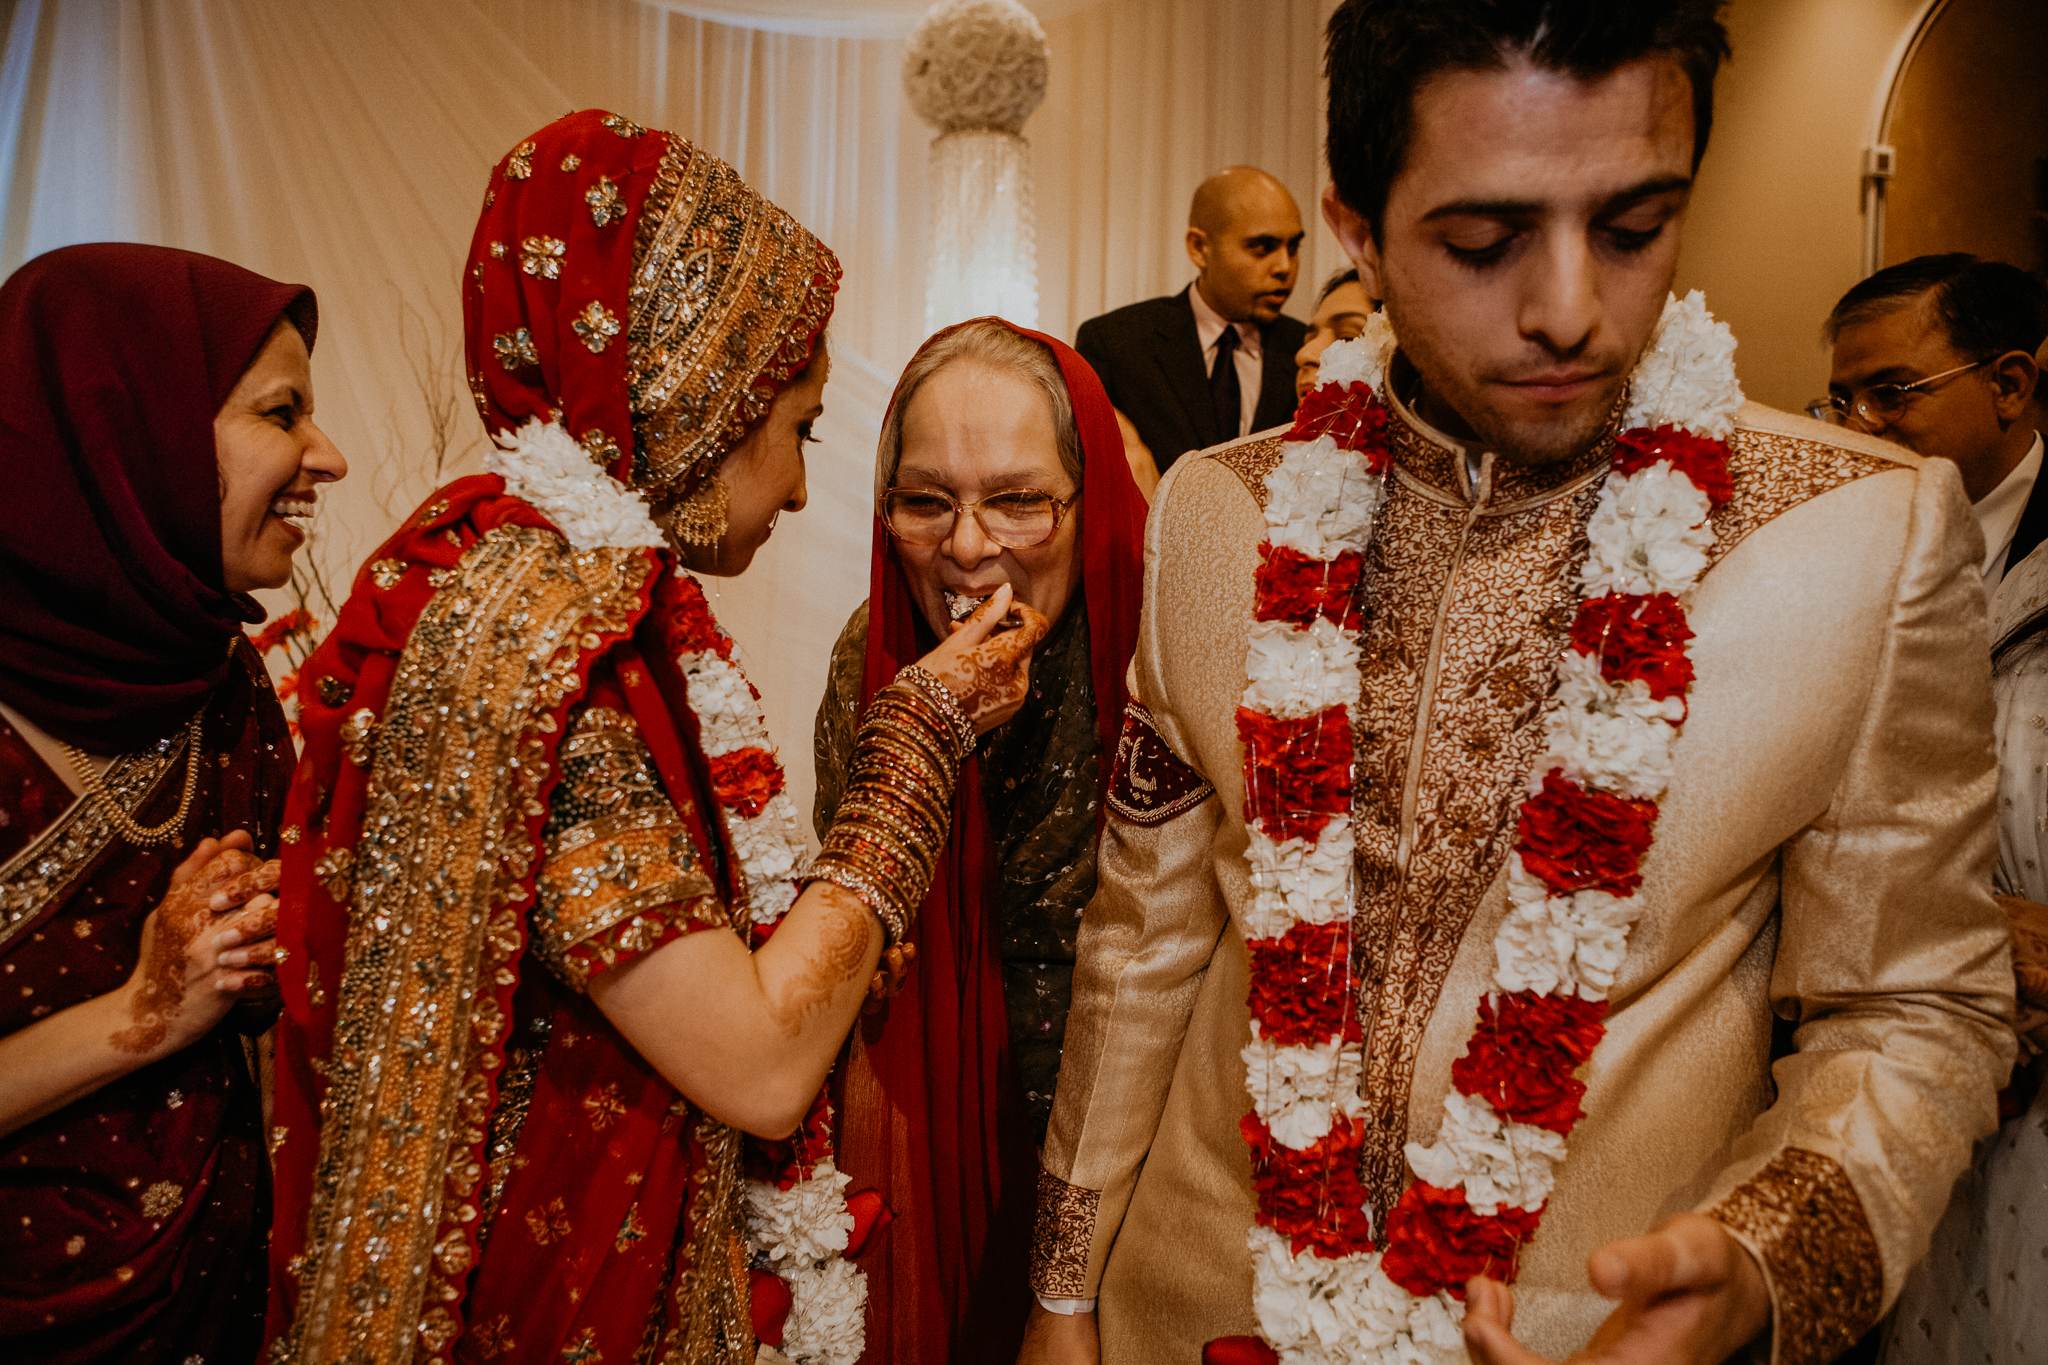 Documentary photo of bride groom and guest at Mehndi Indian wedding